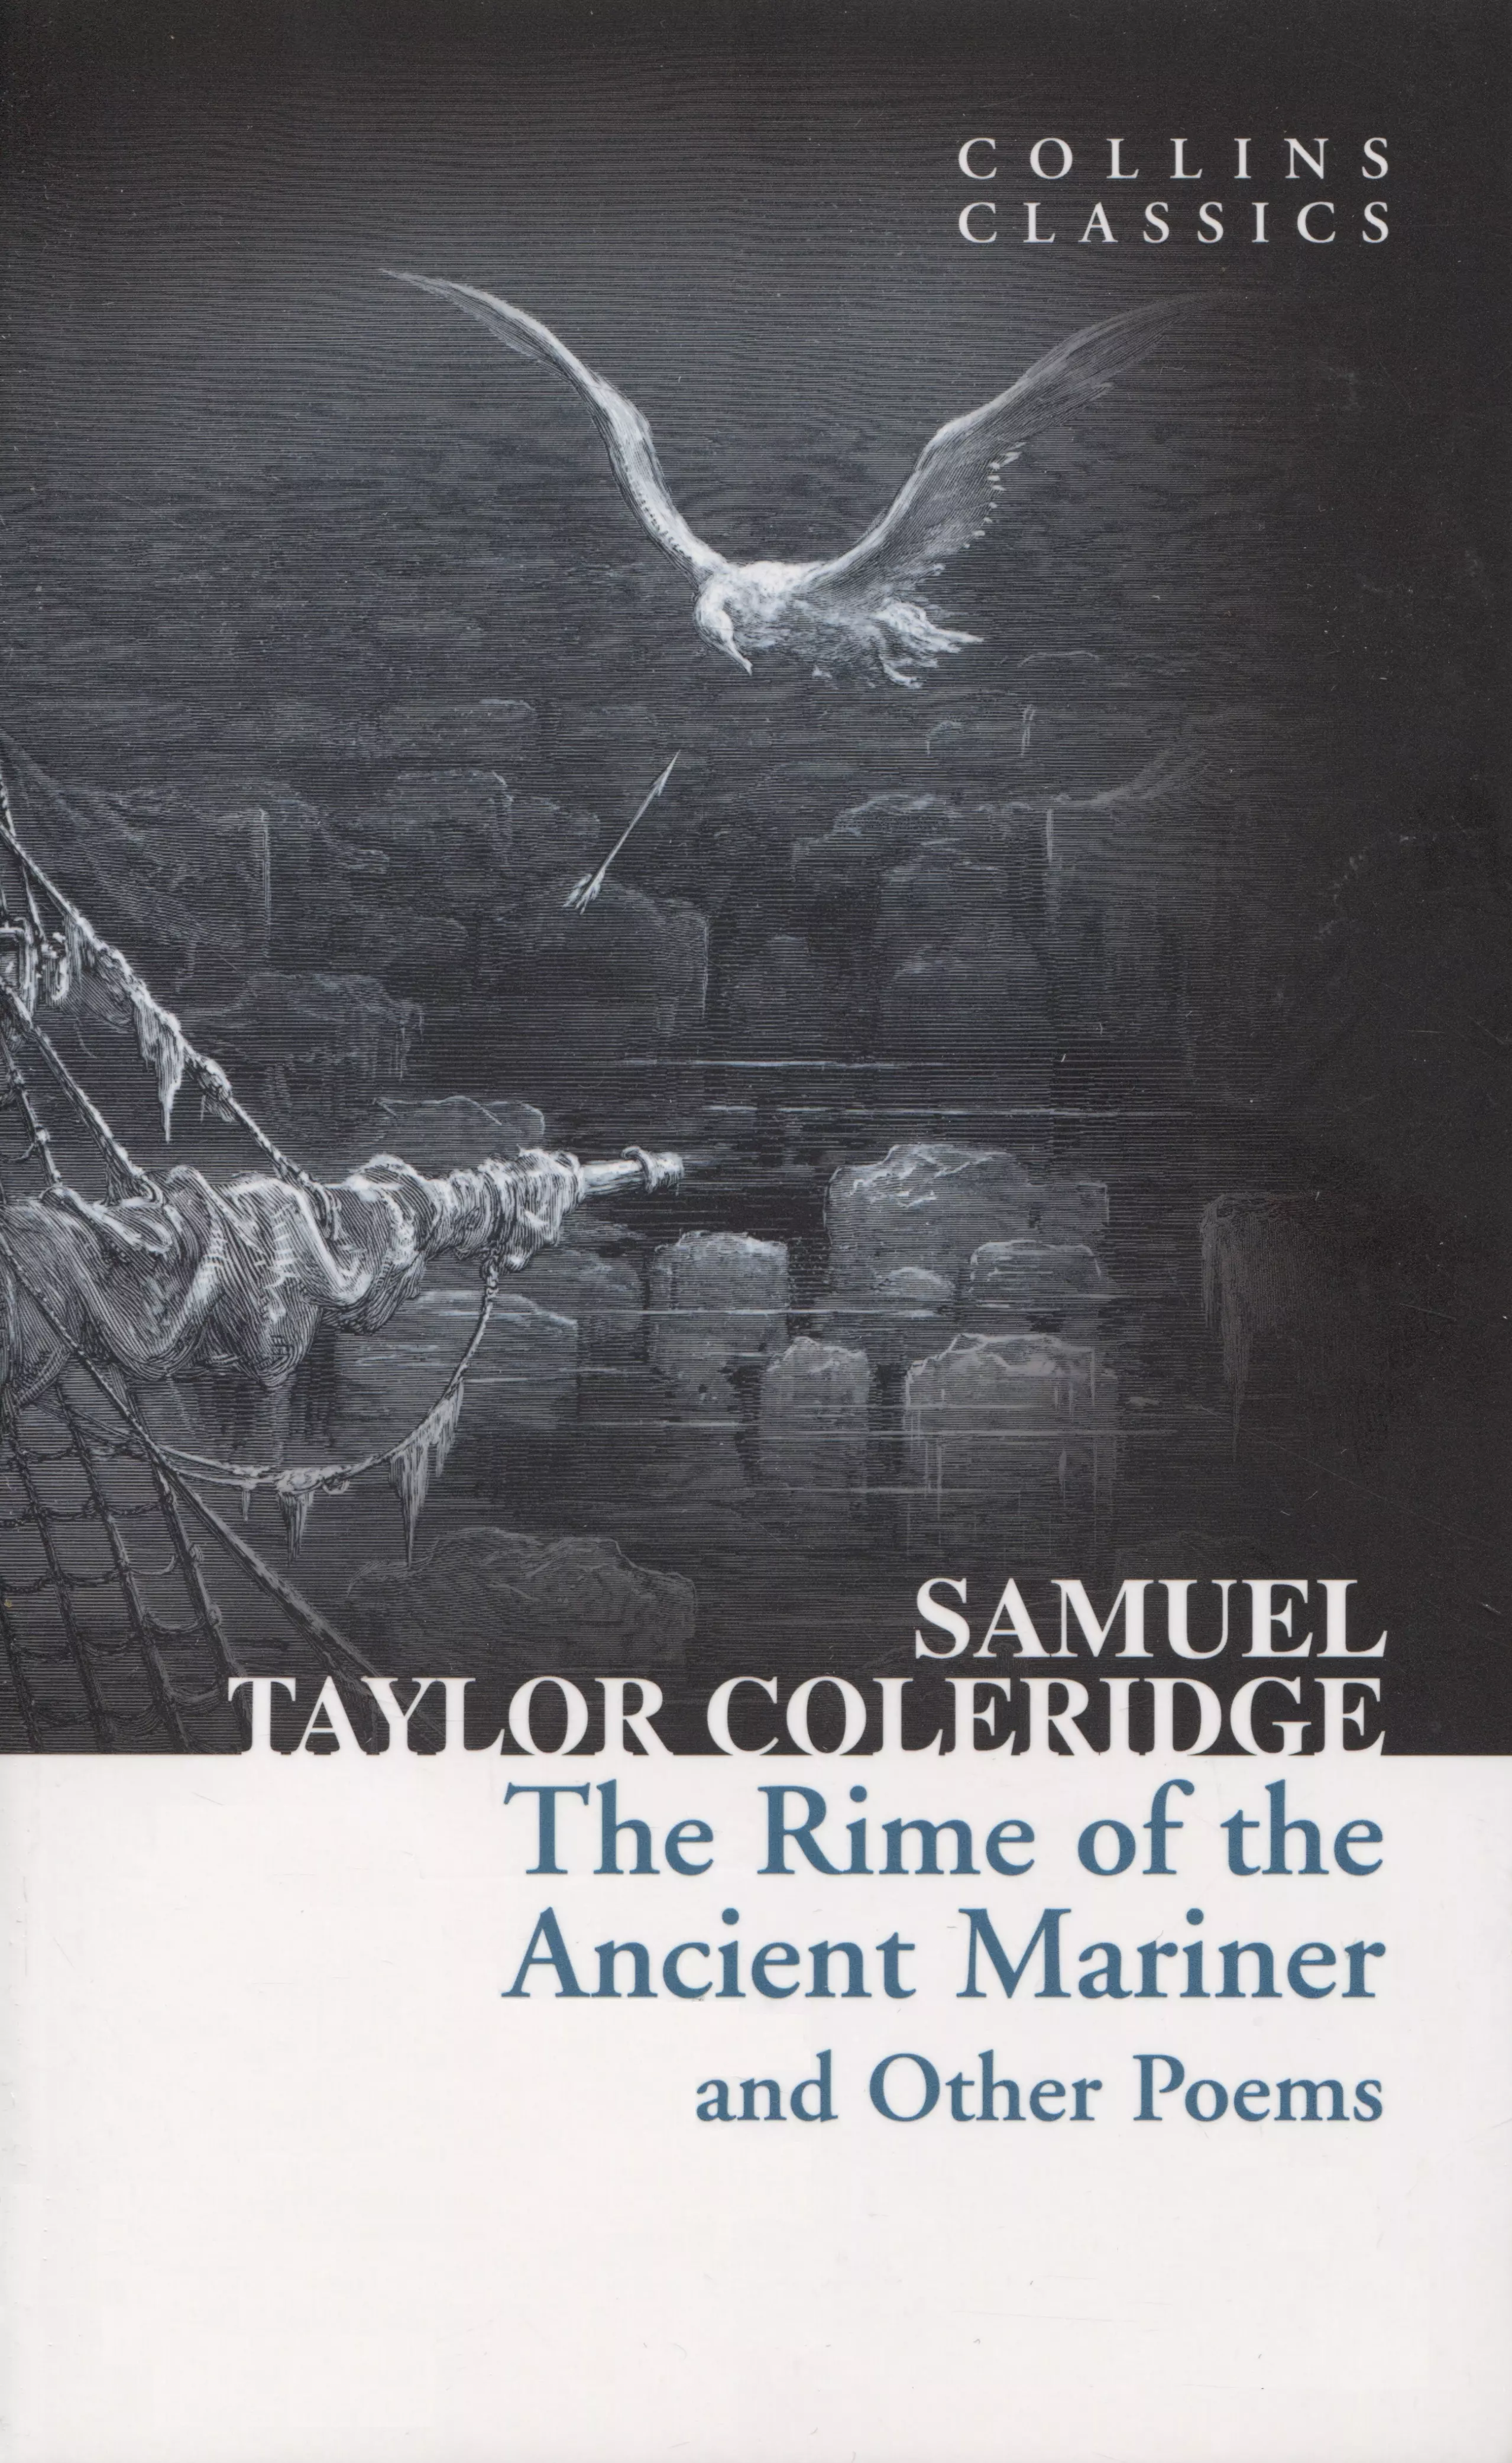 Coleridge Samuel Taylor - The Rime of the Ancient Mariner and Other Poems